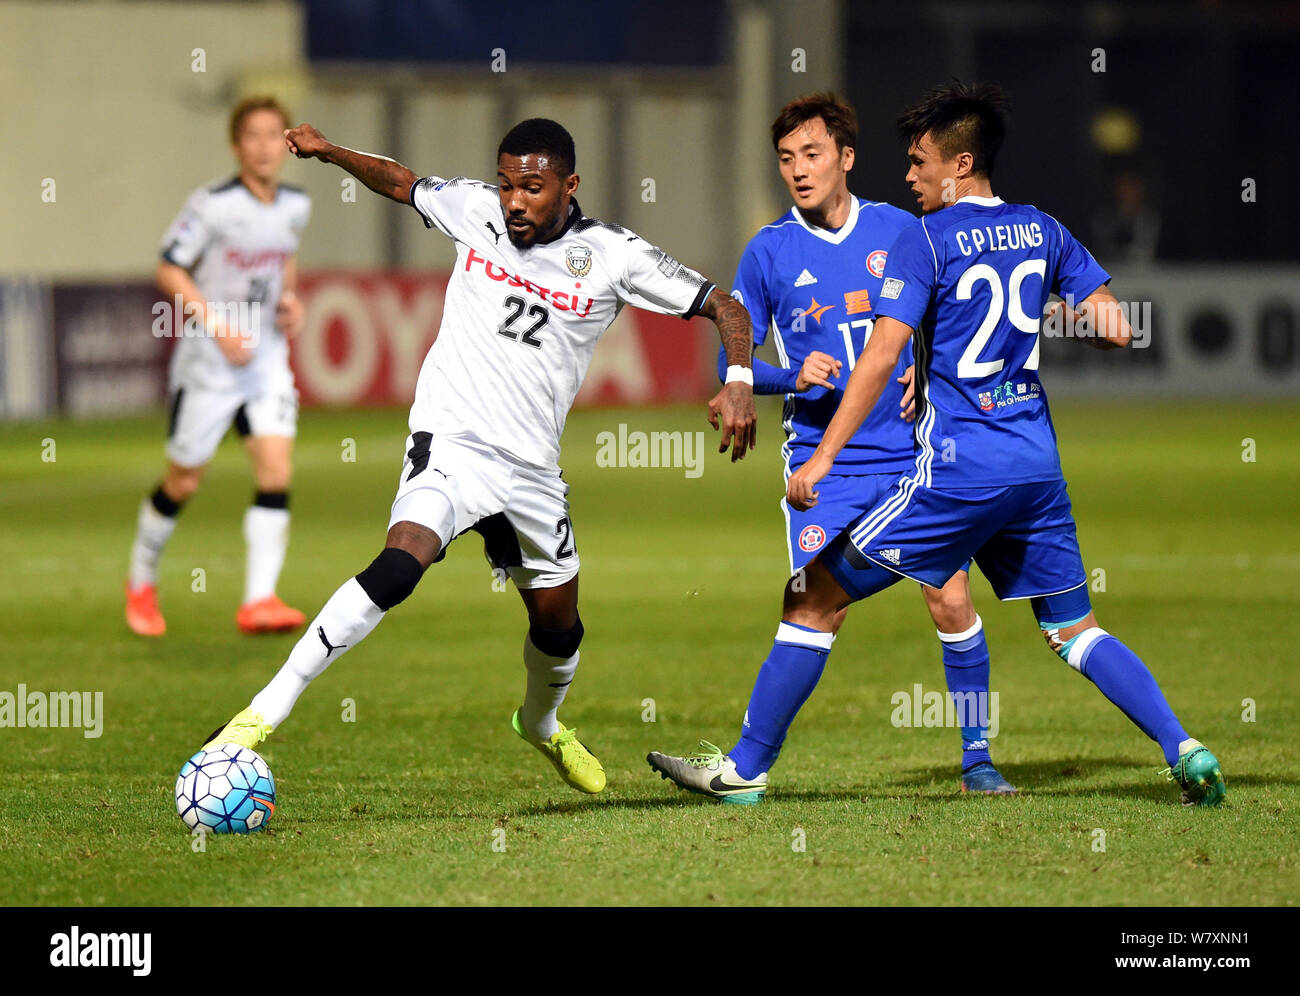 Rhayner of Japan's Kawasaki Frontale, left, challenges Lee Hong Lim, center, and Leung Chun Pong of Hong Kong's Eastern Sports Club in a Group G match Stock Photo